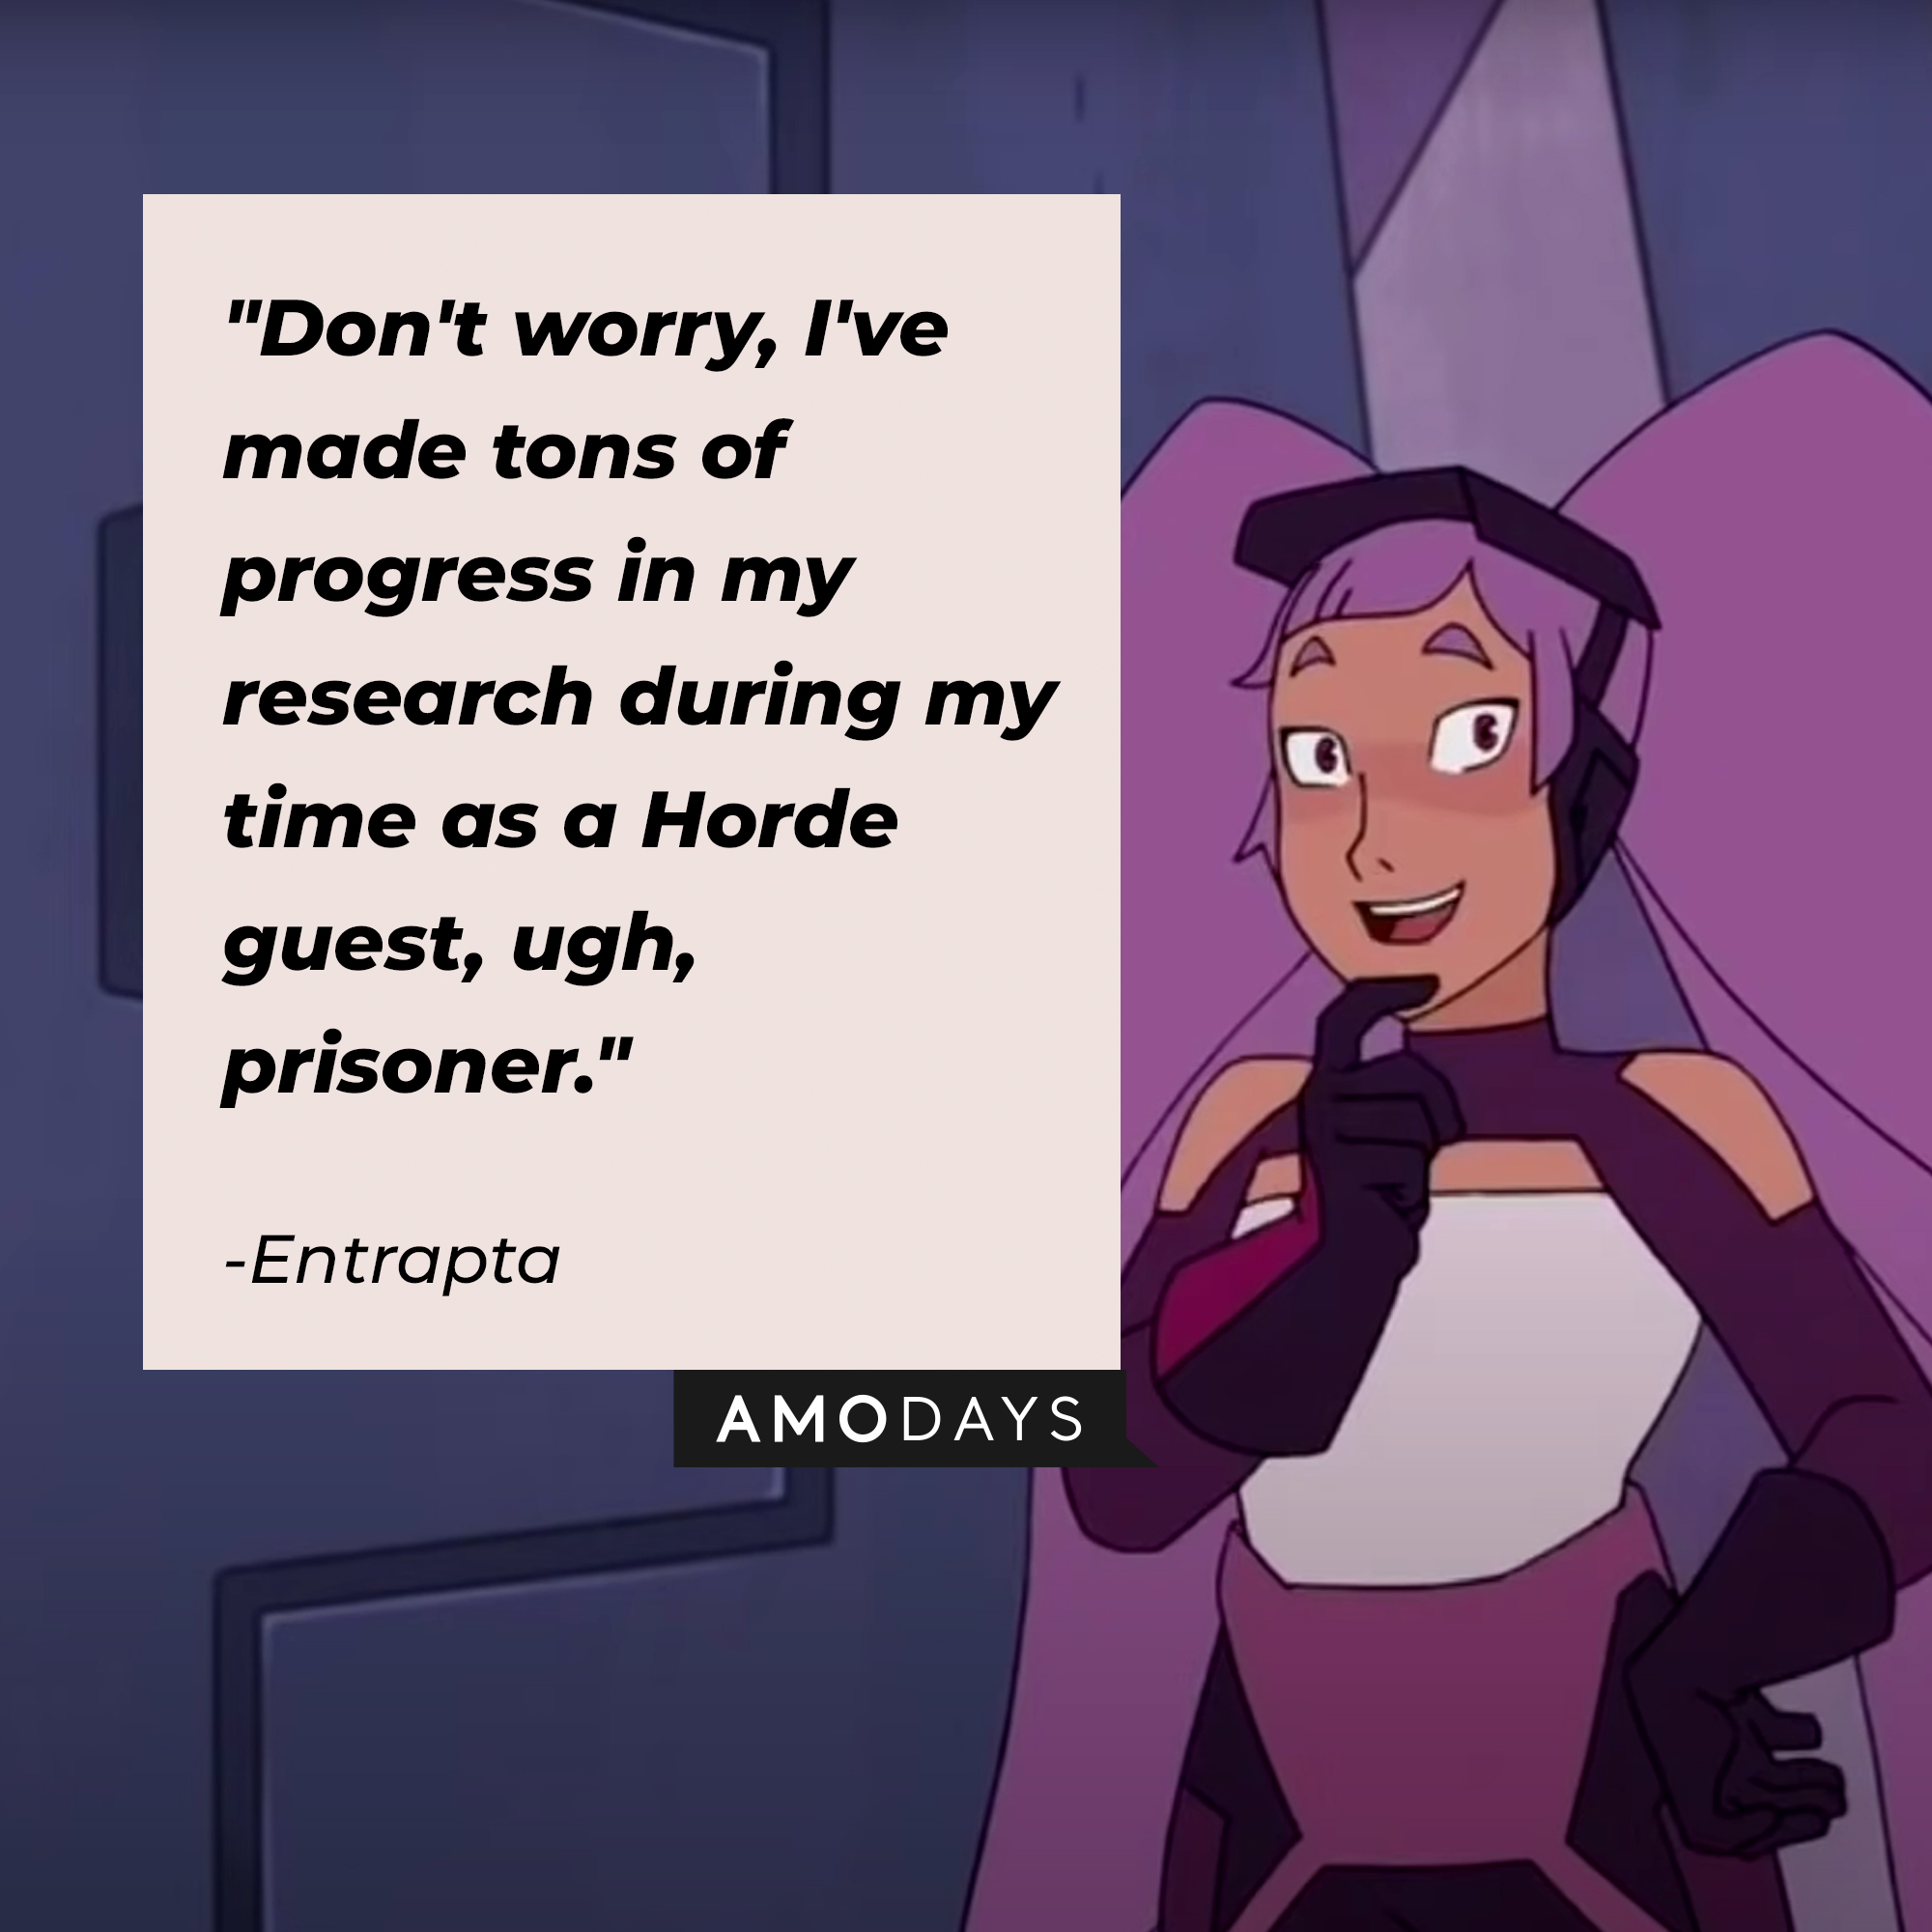 Entrapta's quote: "Don't worry, I've made tons of progress in my research during my time as a Horde guest, ugh, prisoner." | Source: youtube.com/netflixafterschool